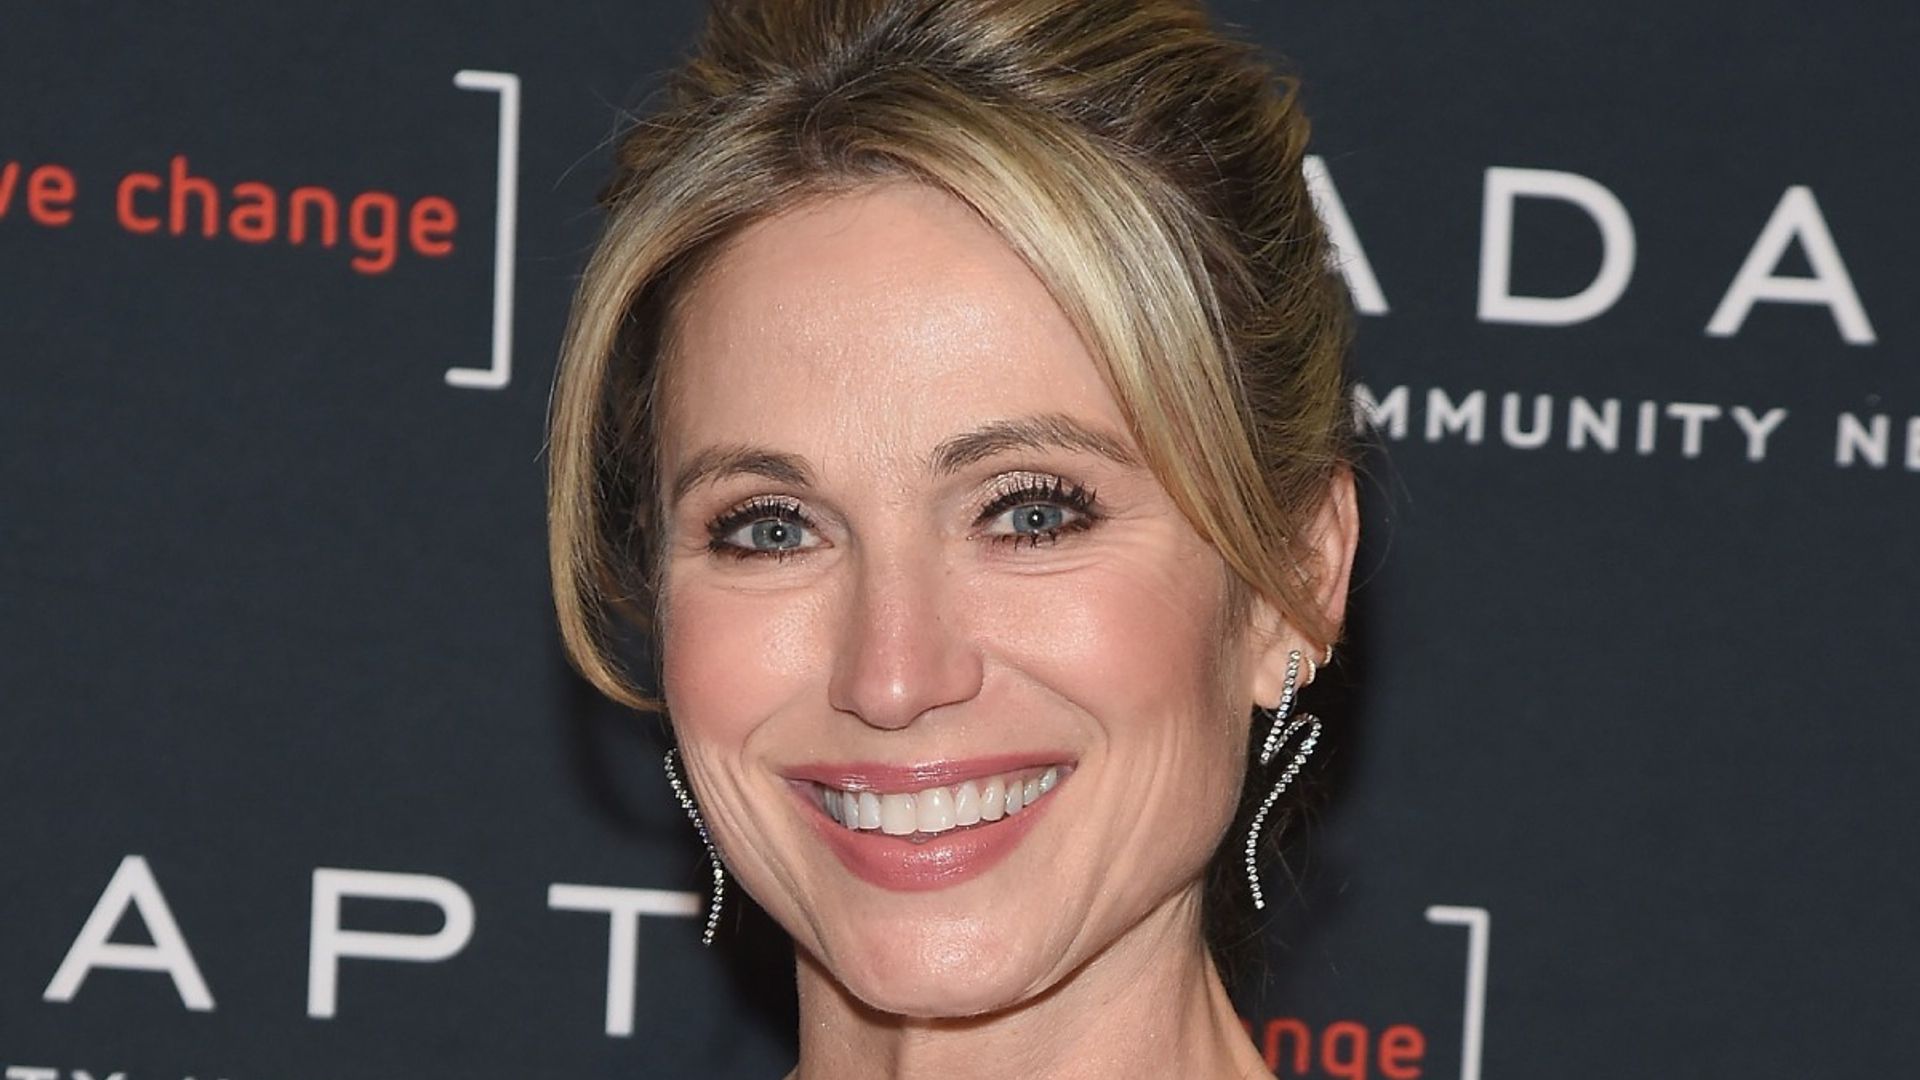 Amy Robach documents last day on GMA ahead of new challenge | HELLO!